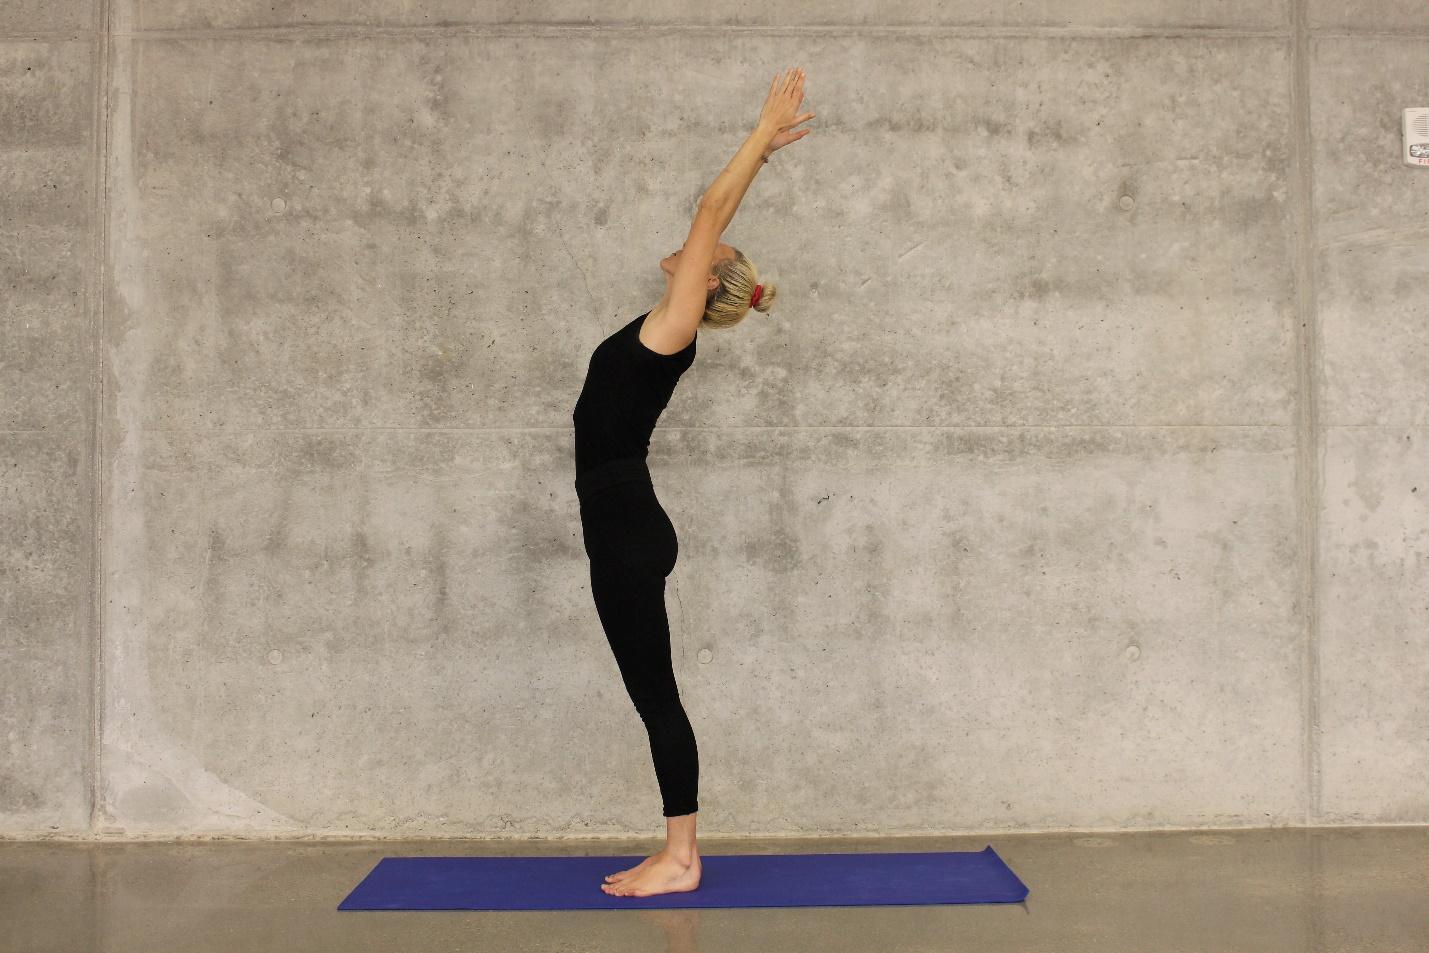 A person doing yoga

Description automatically generated with medium confidence